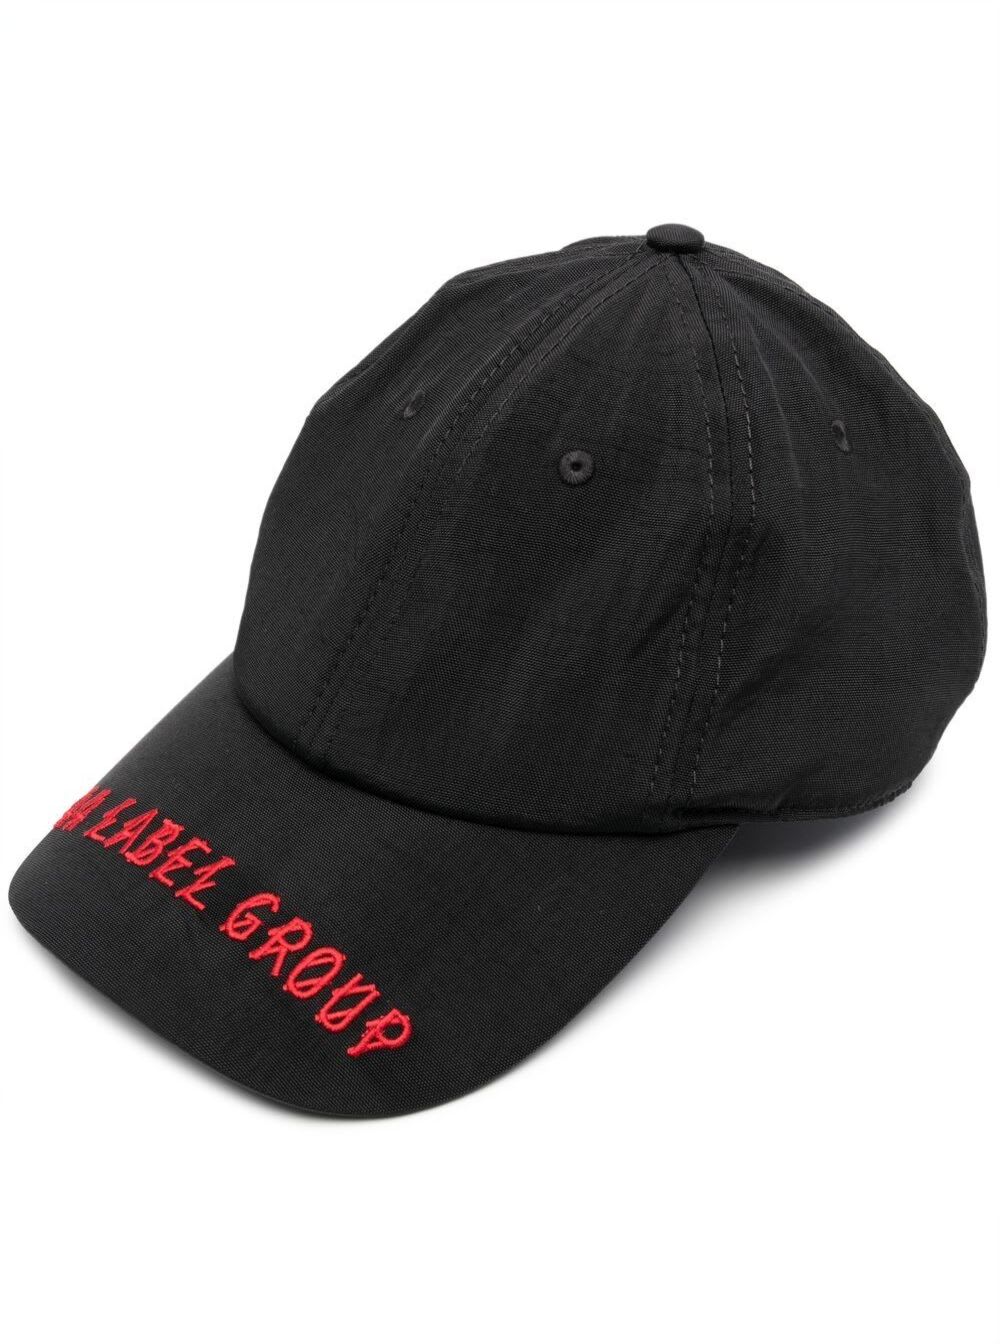 44 LABEL GROUP BLACK BASEBALL CAP WITH LOGO EMBROIDERY IN COTTON MAN